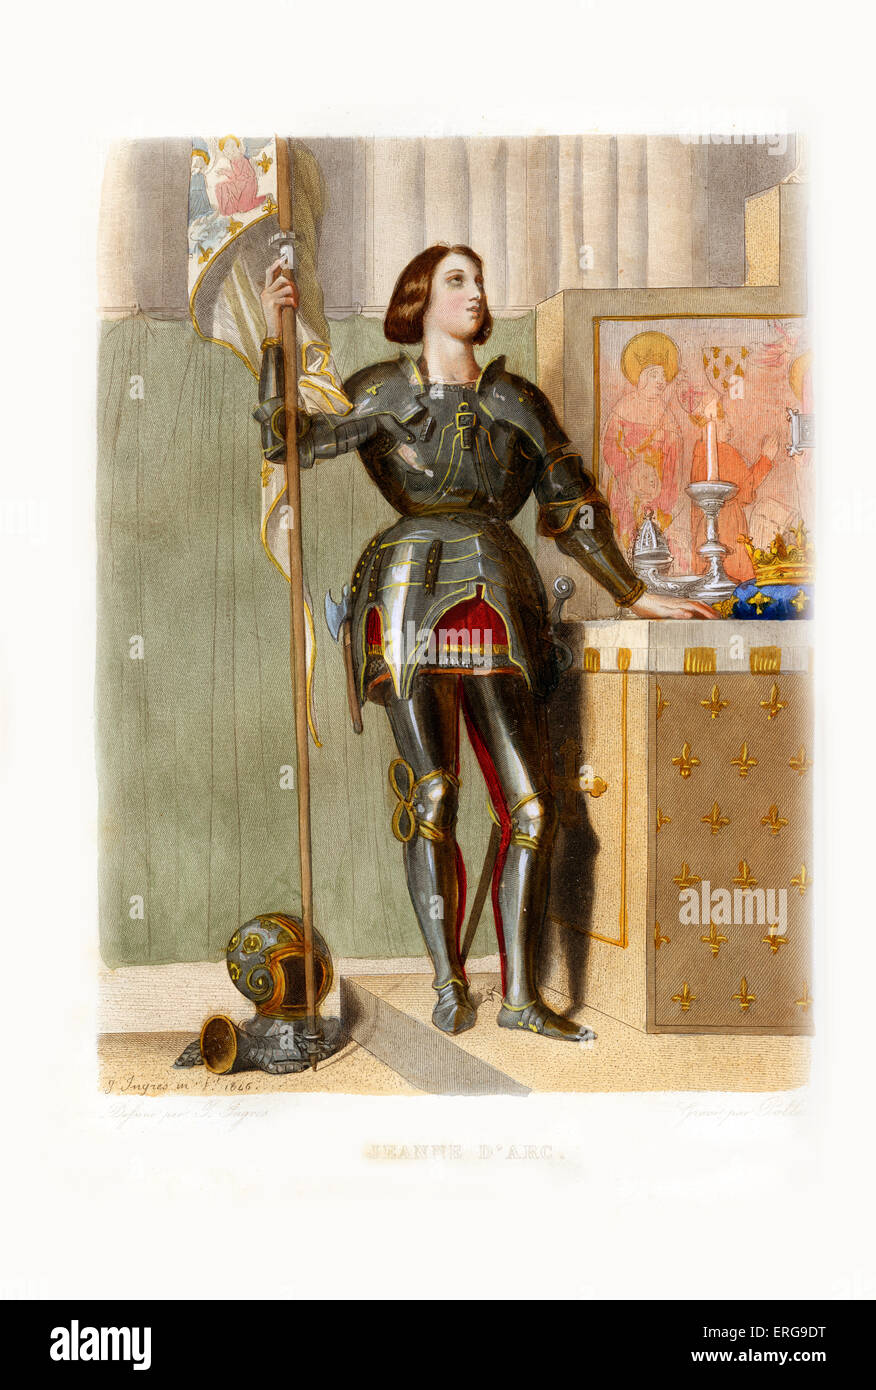 Saint Joan of Arc (French: Jeanne d'Arc), also known as The Maid of Orléans. National heroine of France and a Catholic saint. A peasant girl who claimed Divine guidance, she led the French army to several important victories during the Hundred Years' War. c.1410- 1431. Engraving by Pollet, c.1846. Stock Photo